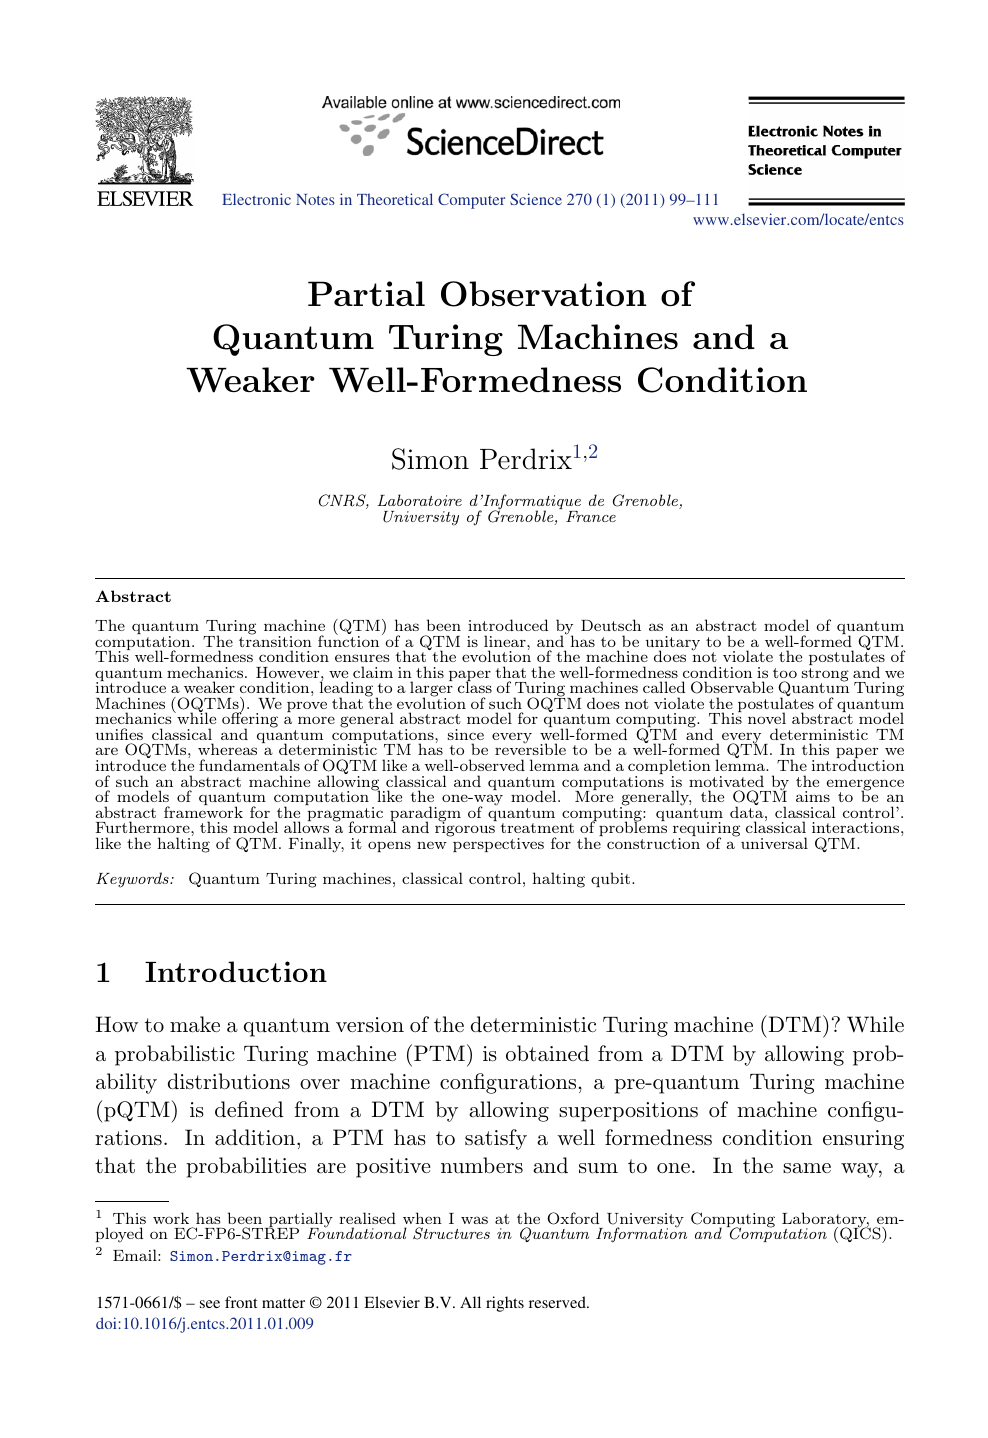 Partial Observation Of Quantum Turing Machines And A Weaker Well Formedness Condition Topic Of Research Paper In Mathematics Download Scholarly Article Pdf And Read For Free On Cyberleninka Open Science Hub